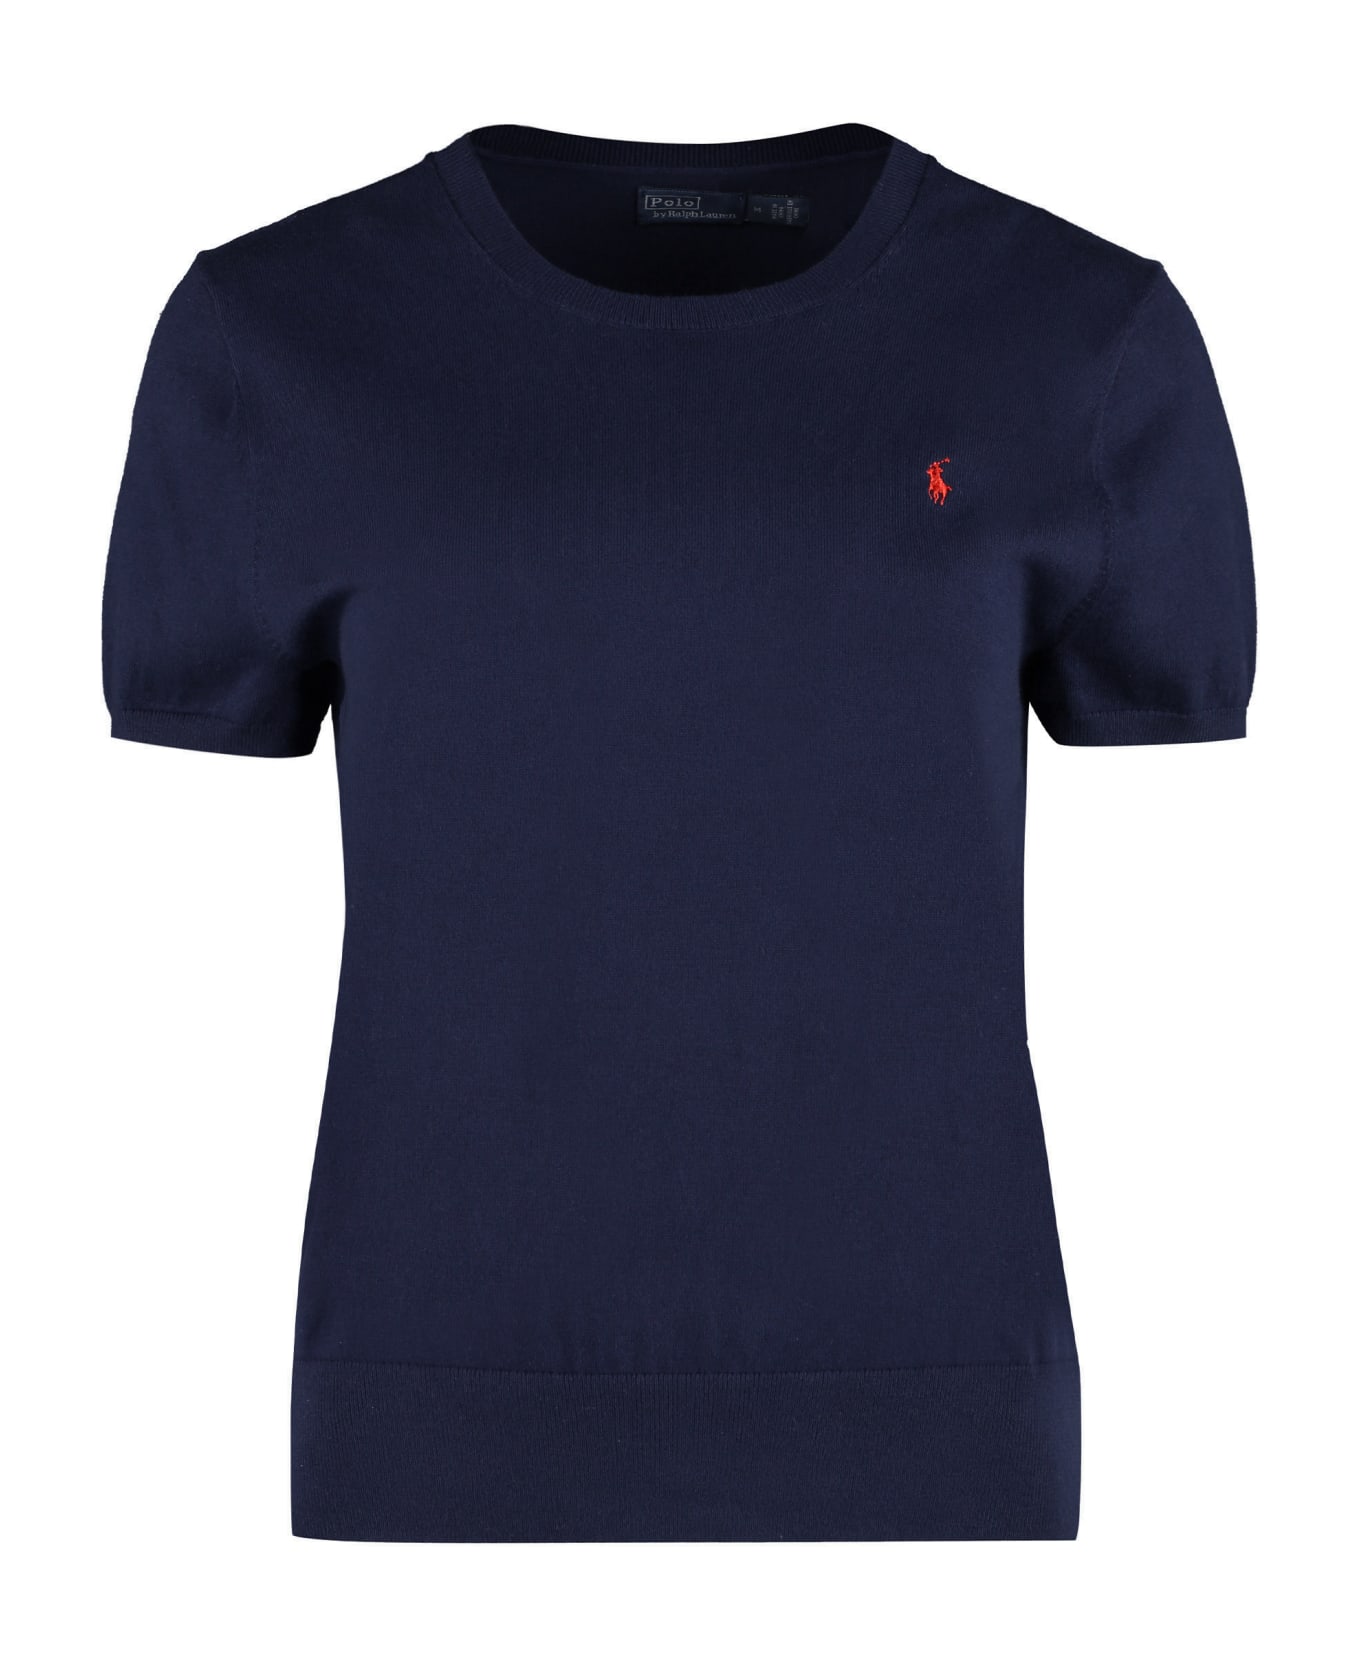 Polo Ralph Lauren Logo Embroidered Cotton Sweater - blue